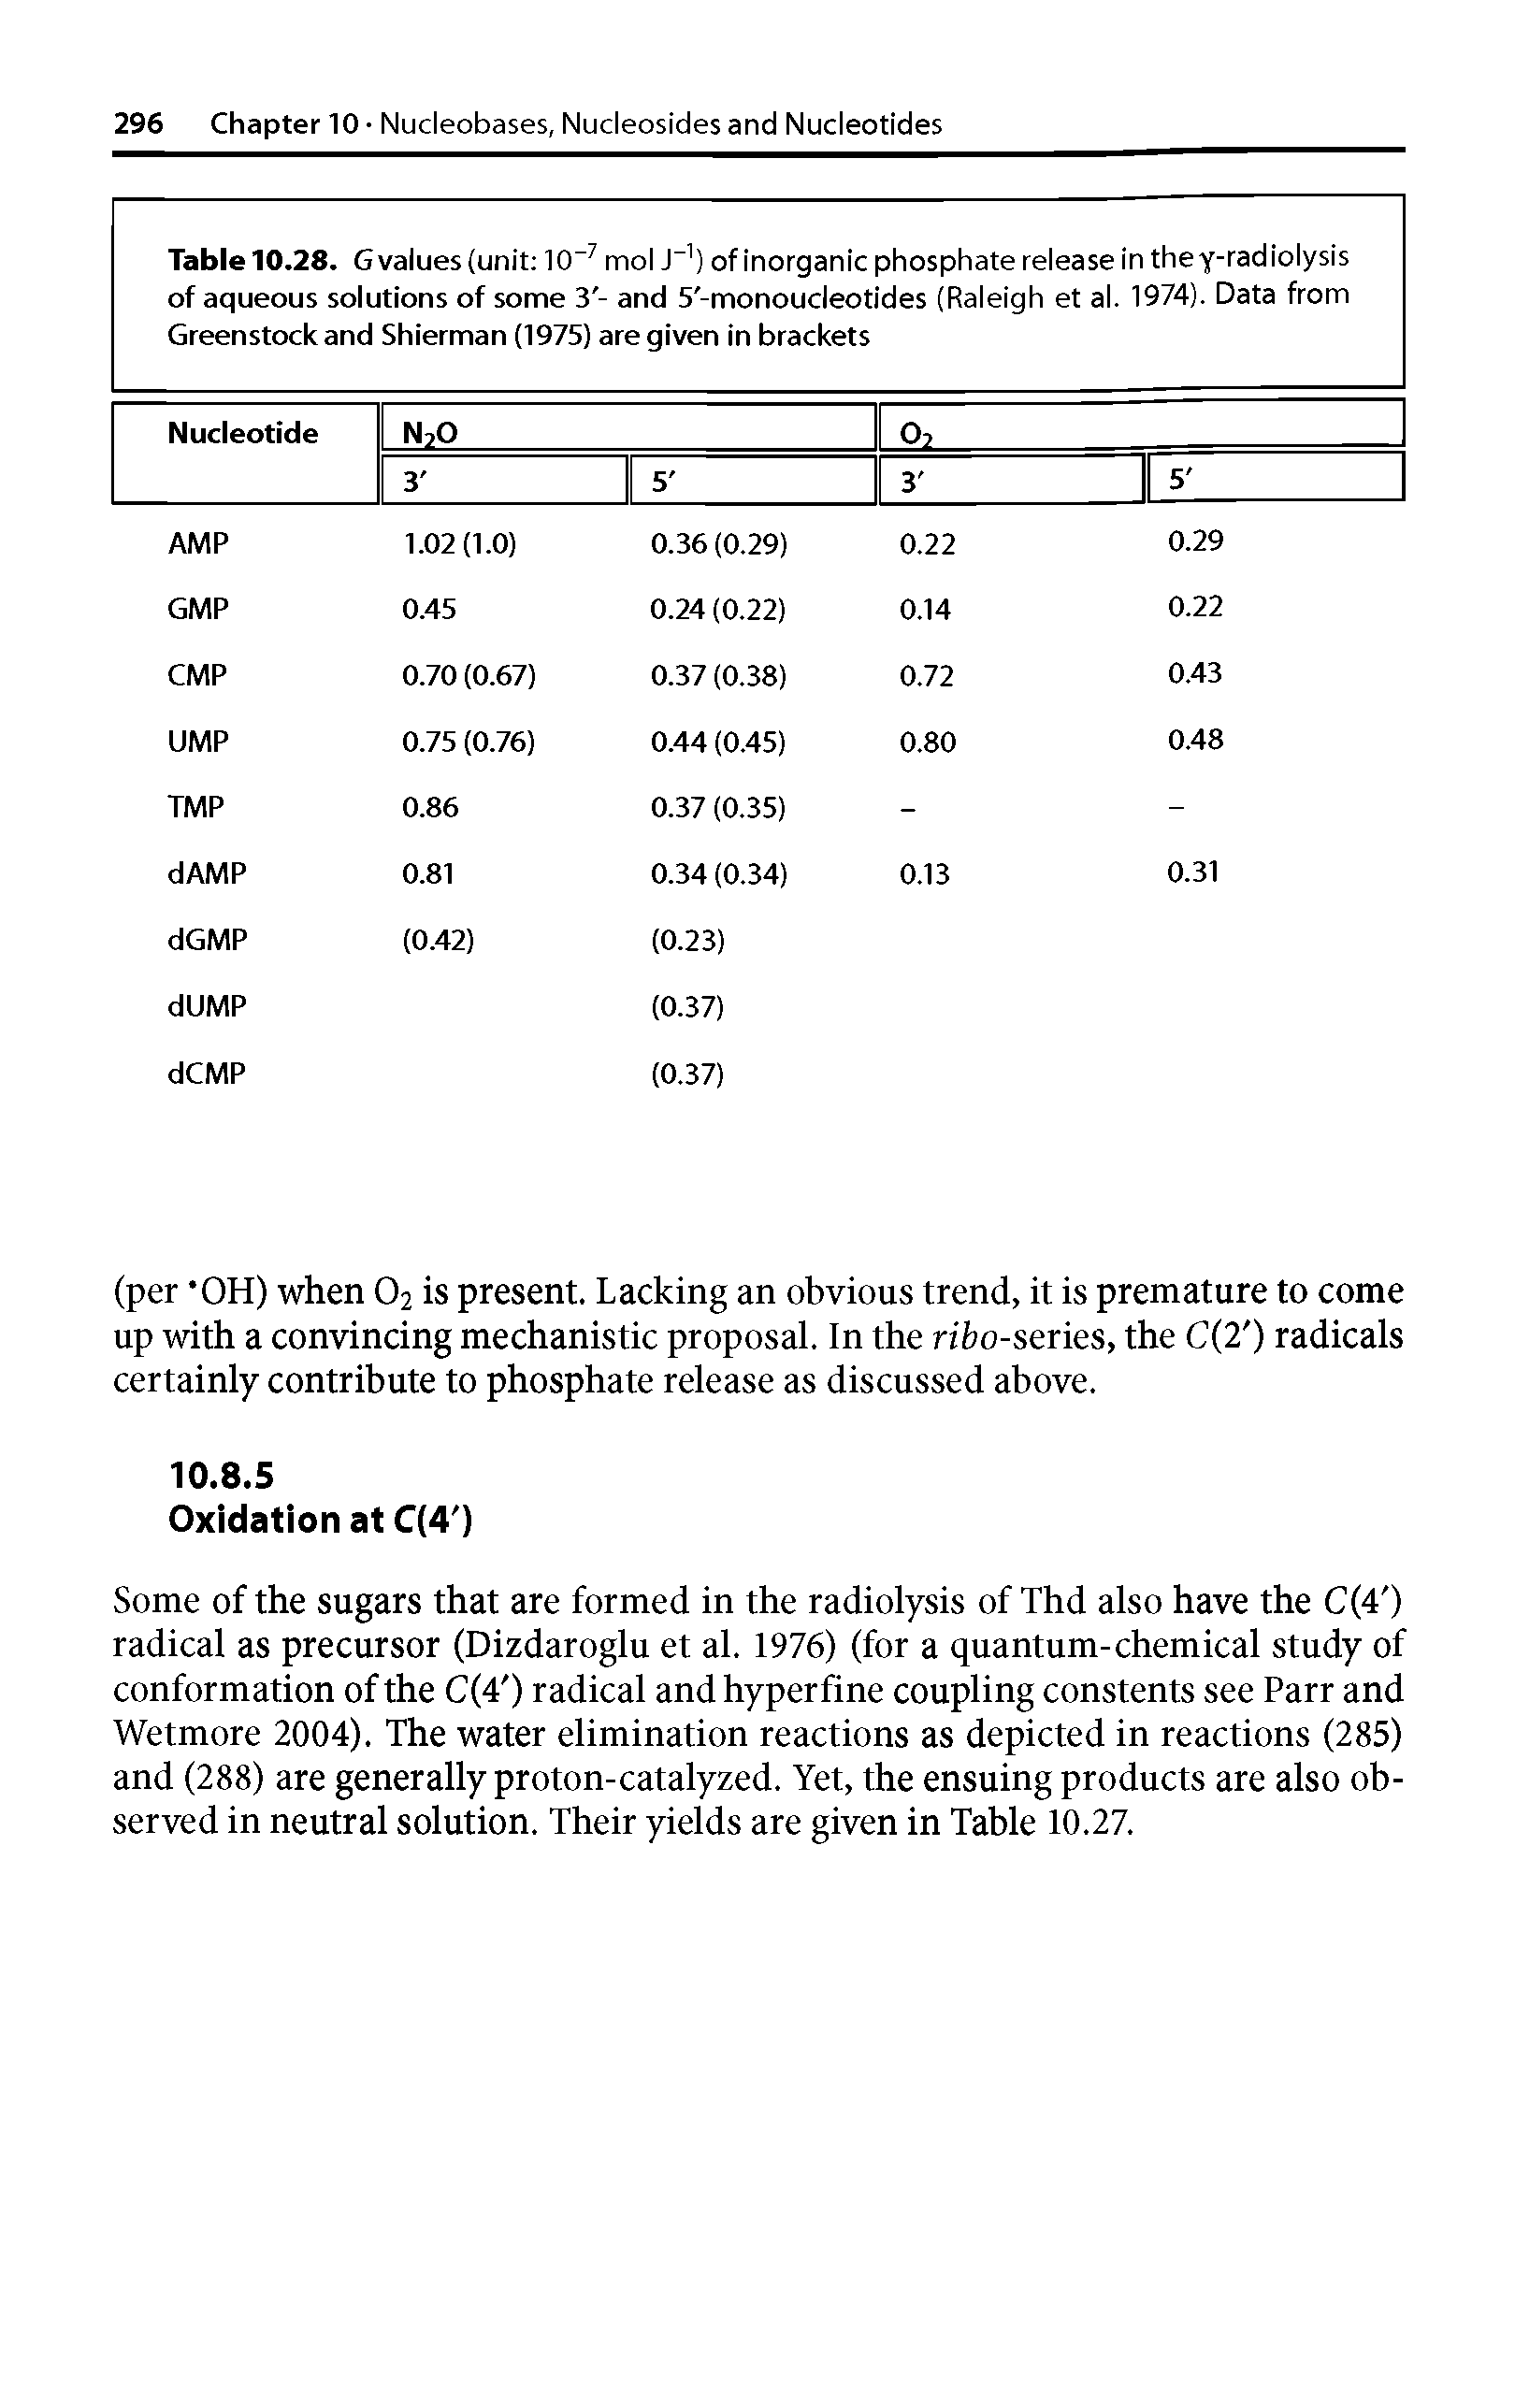 Table 10.28. Gvalues(unit 10 7molJ ) of inorganic phosphate release in they-radiolysis of aqueous solutions of some 3 - and 5 -monoucleotides (Raleigh et al. 1974). Data from...